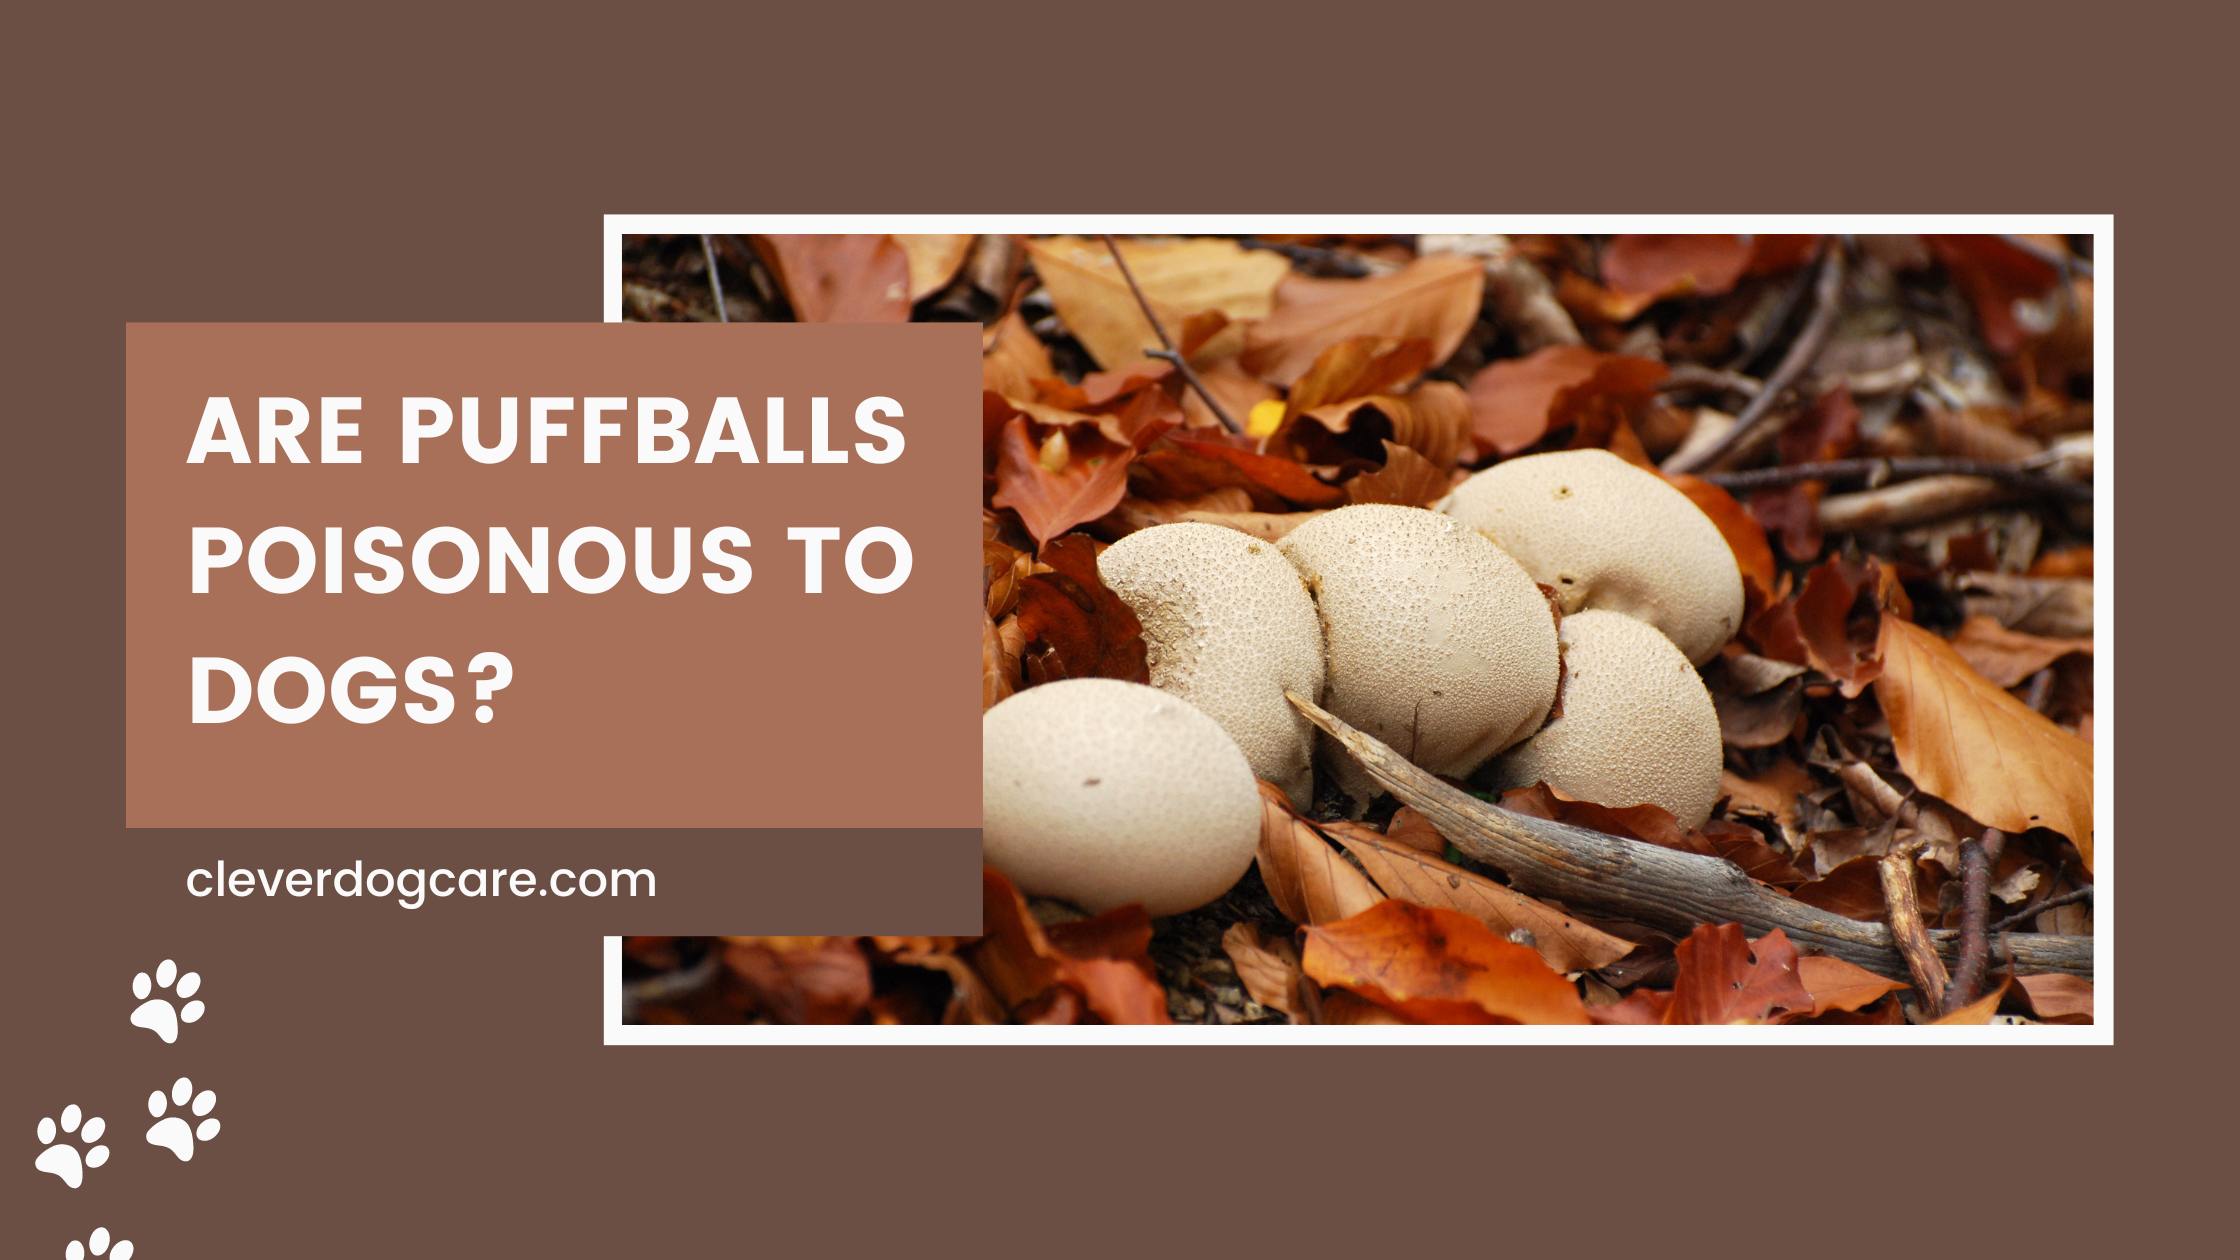 Are puffballs poisonous to dogs